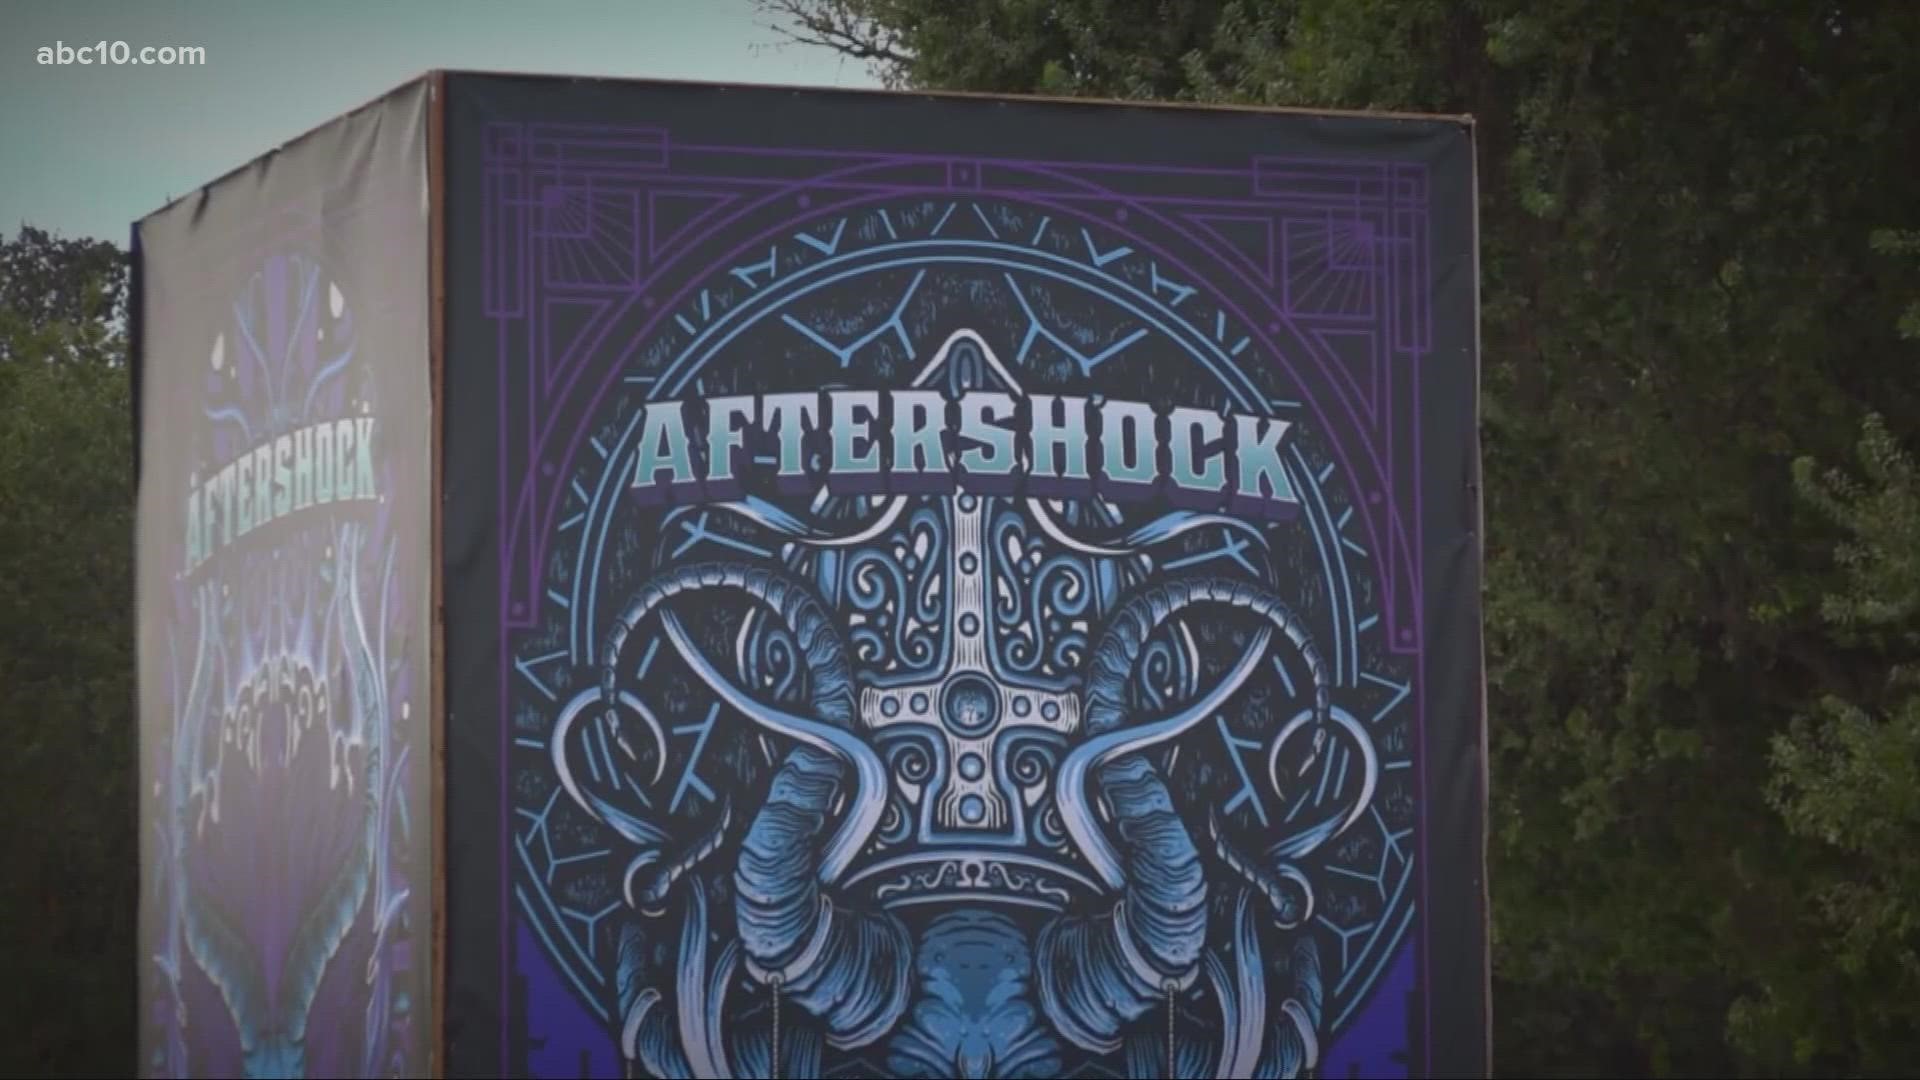 Thursday is the first night of the sold-out, four-day rock music festival, Aftershock, in Sacramento's Discovery Park featuring huge acts like Metallica and more.